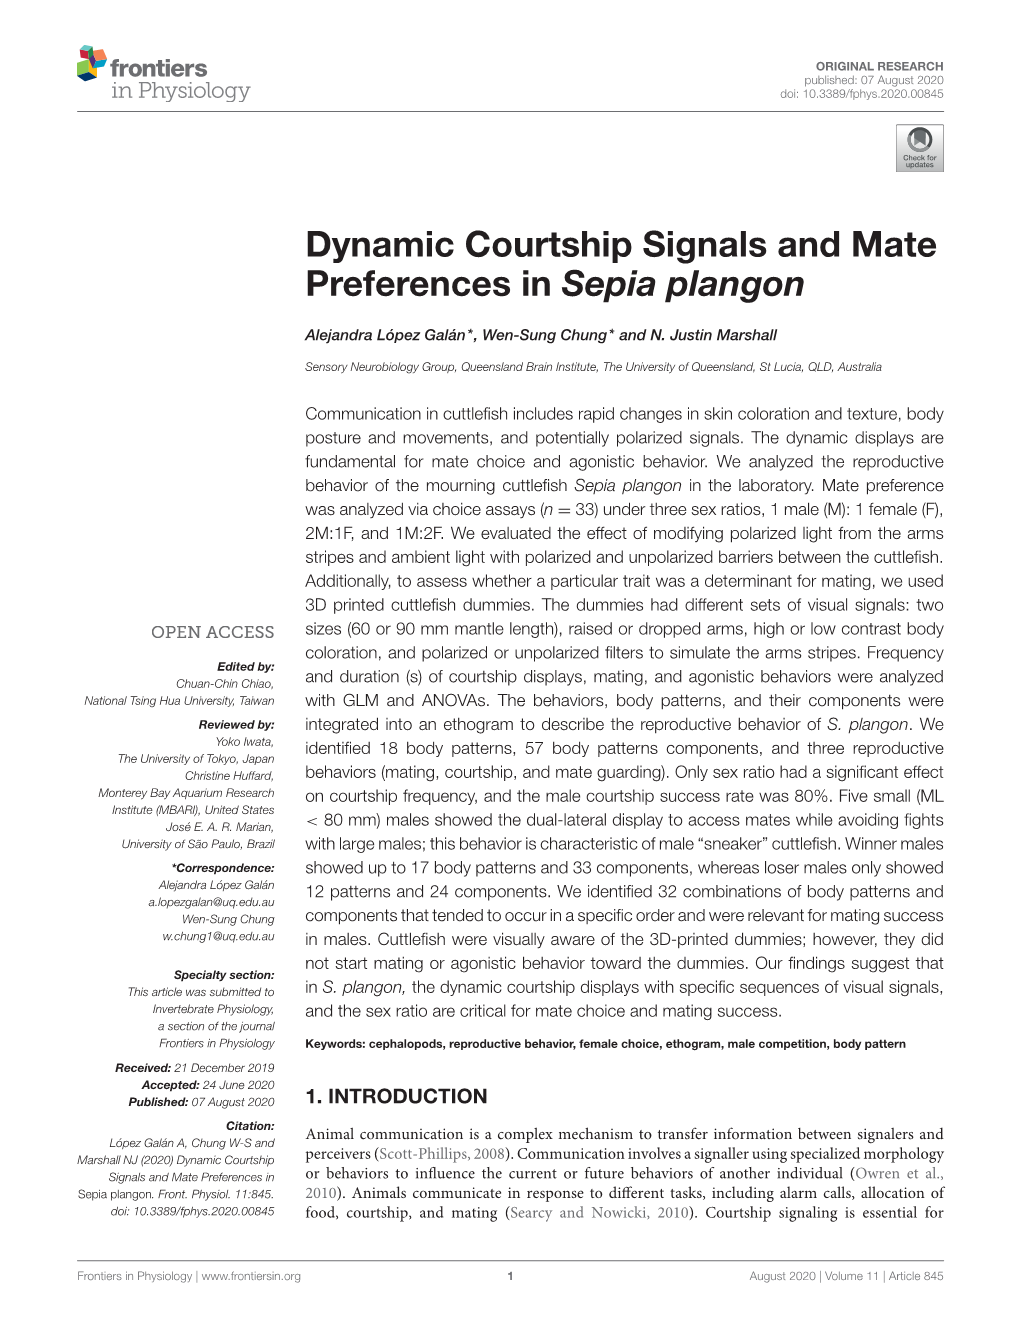 Dynamic Courtship Signals and Mate Preferences in Sepia Plangon